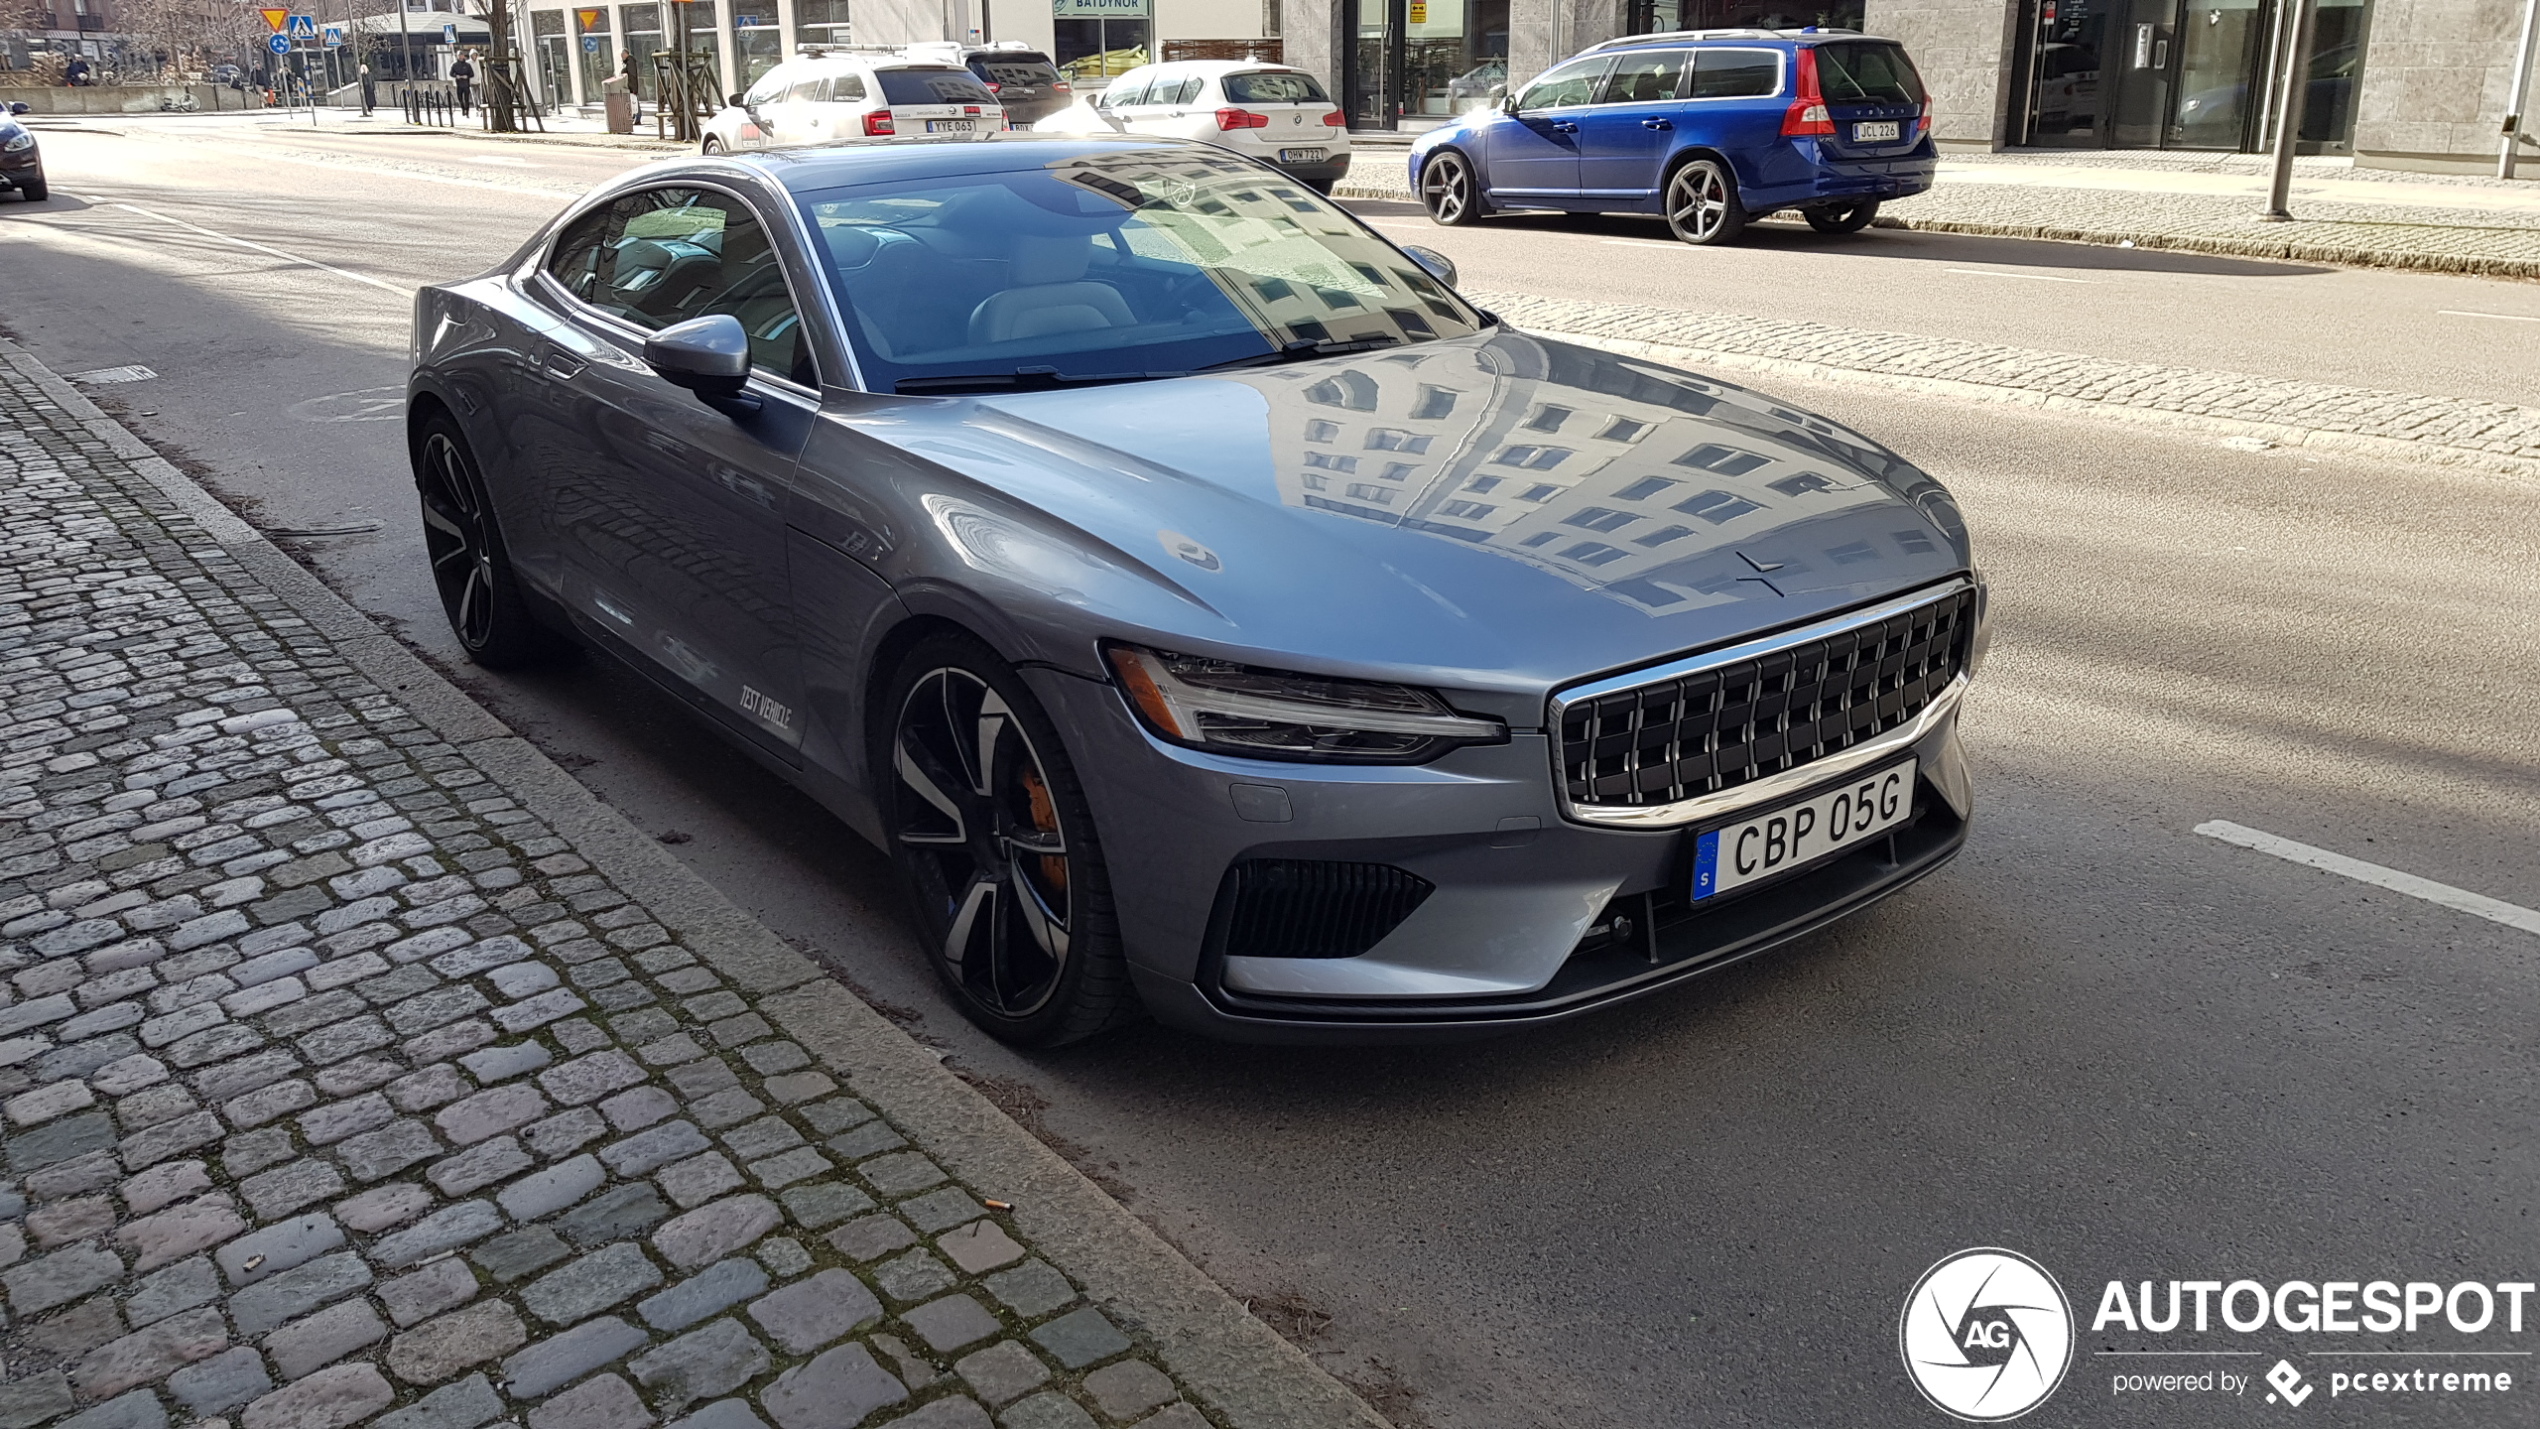 Polestar one starts to appear in the streets.